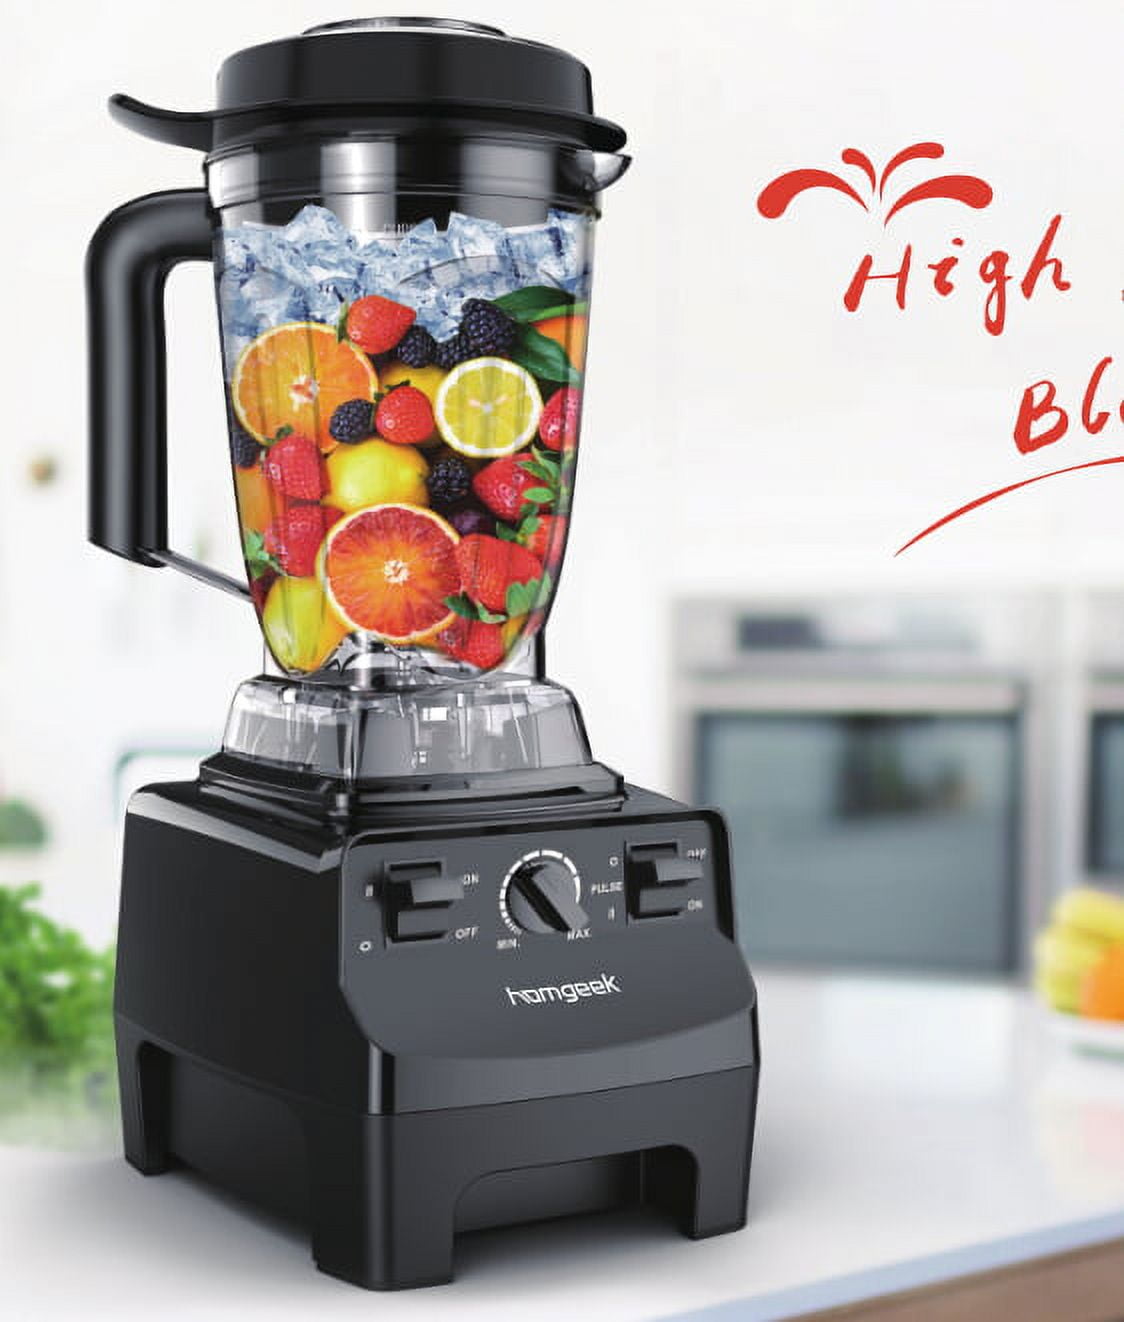 Homgeek 1450W High Speed Blender Review: Vitamix on a Budget - Delishably